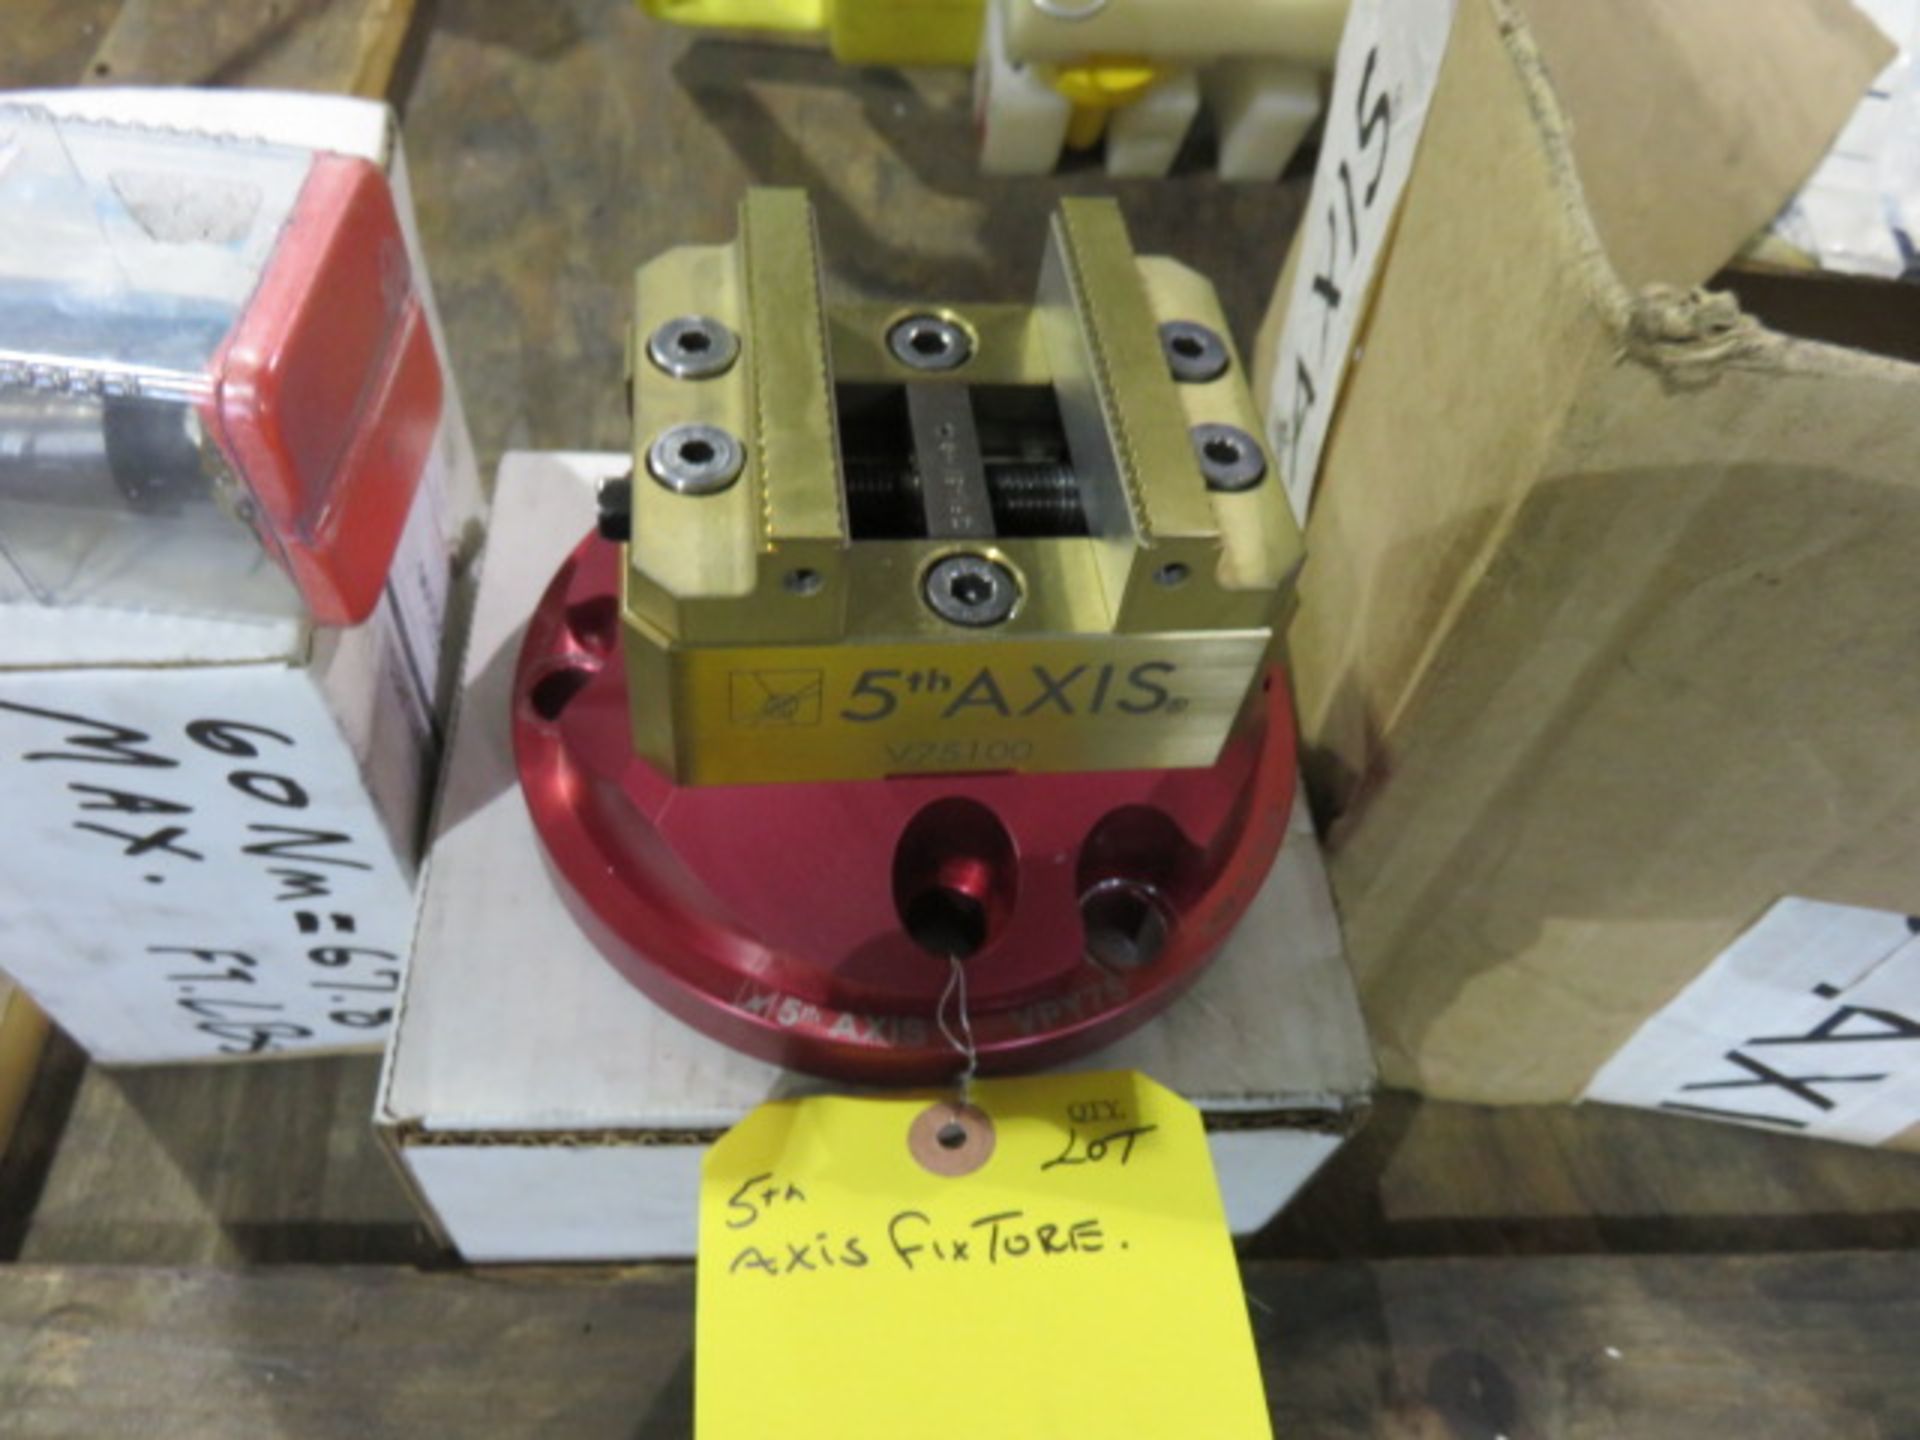 FIFTH AXIS VPY75 WORKHOLDING FIXTURE W/ DC1750-4 DOVETAIL CUTTER - Image 2 of 3